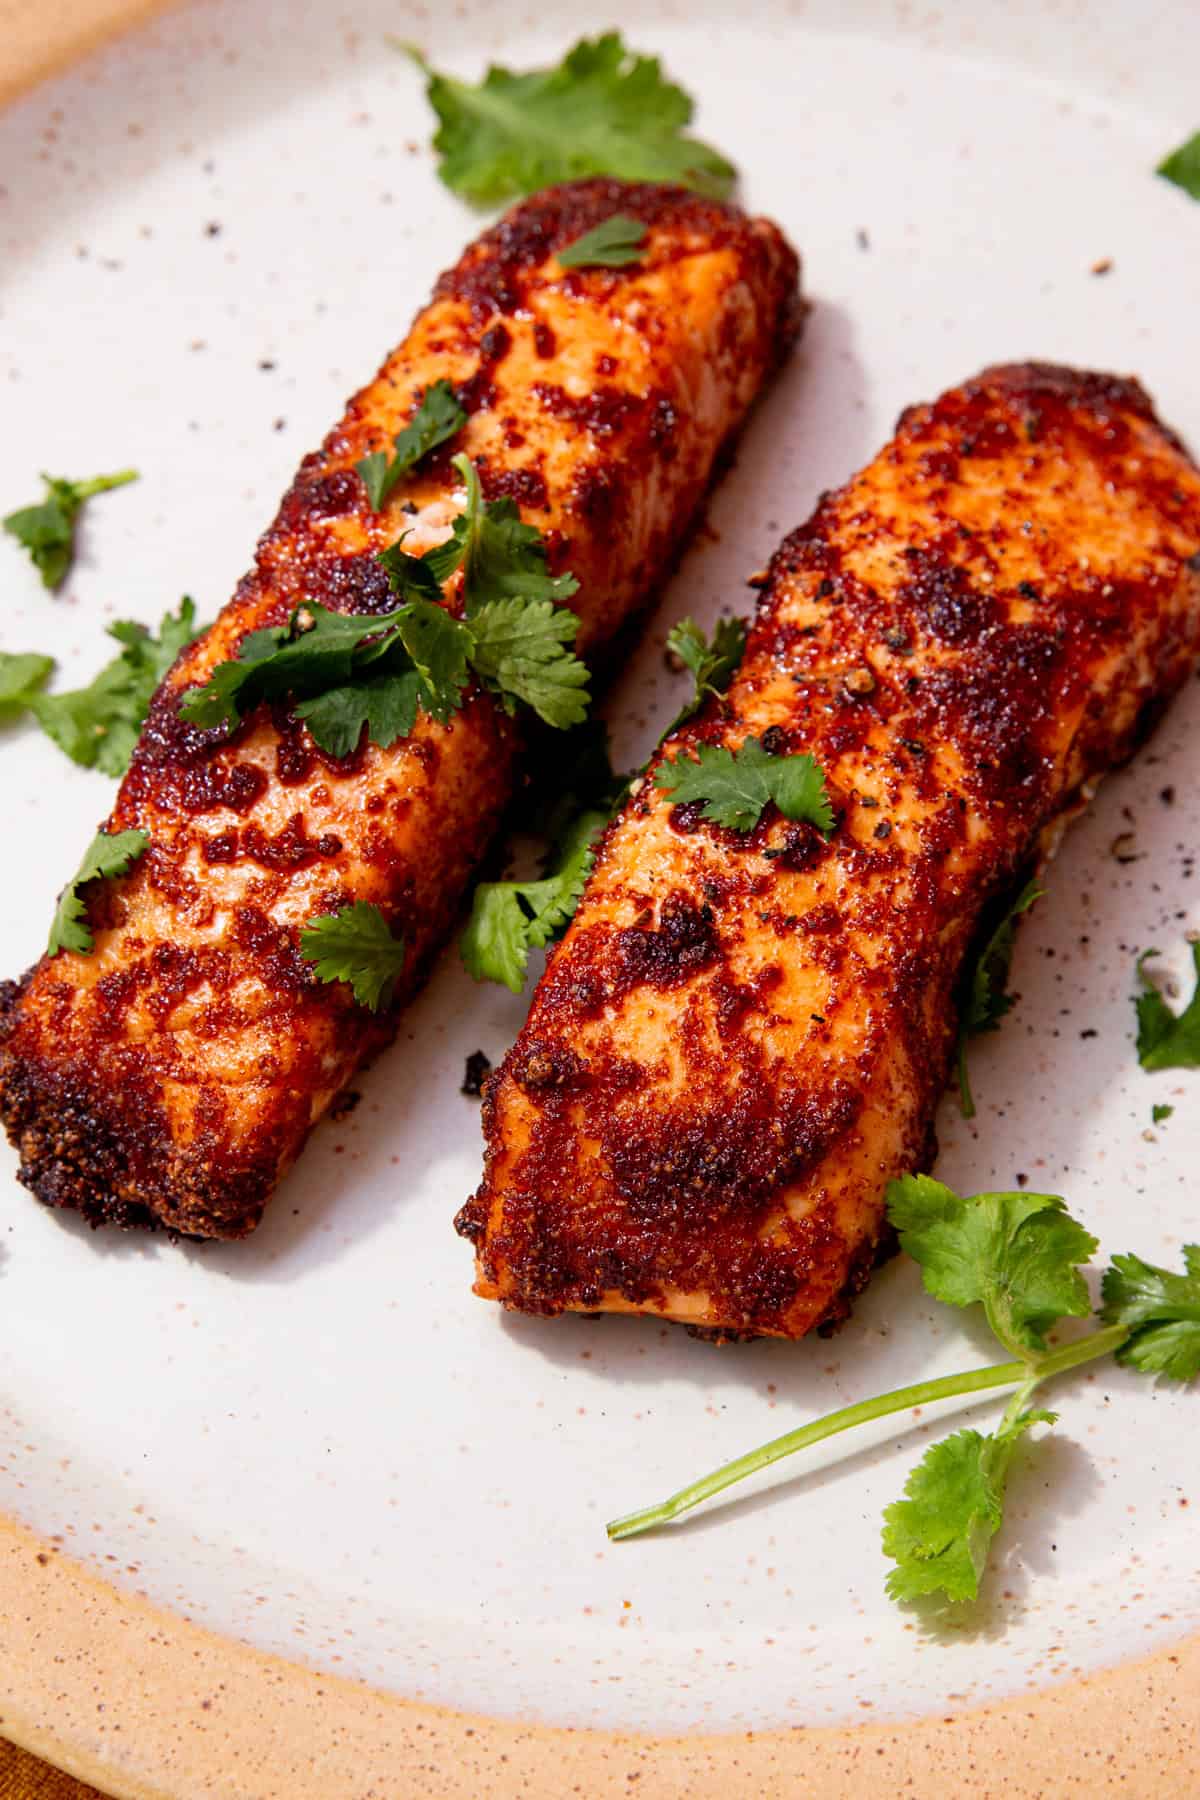 2 cooked salmon fillets with a coating of darker browned seasoning on a plate and some fresh coriander.